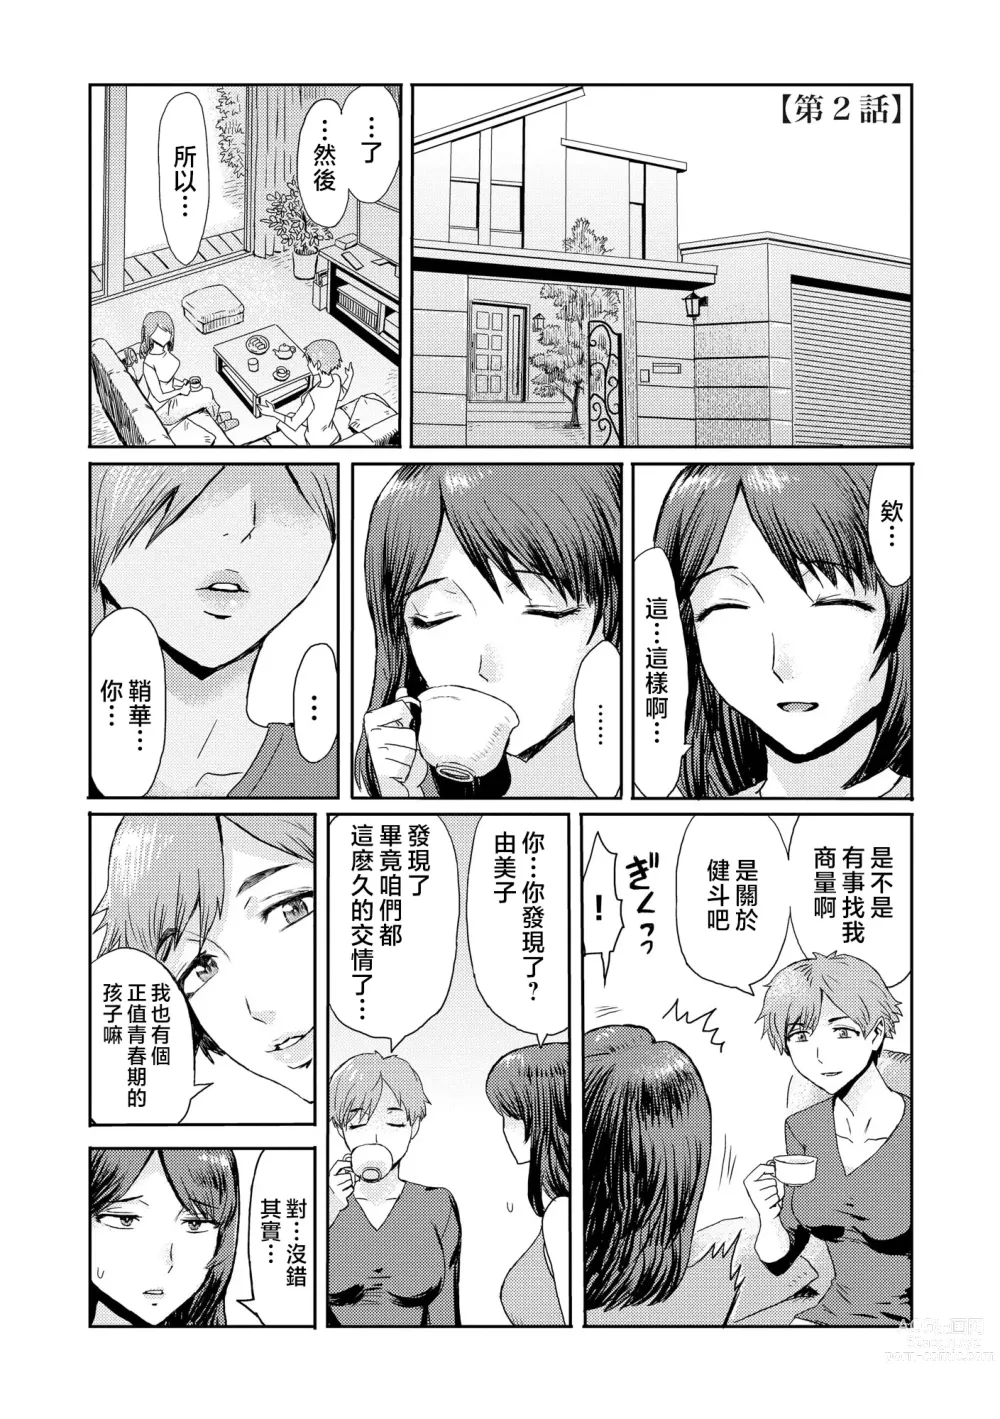 Page 29 of manga Soukan Syndrome